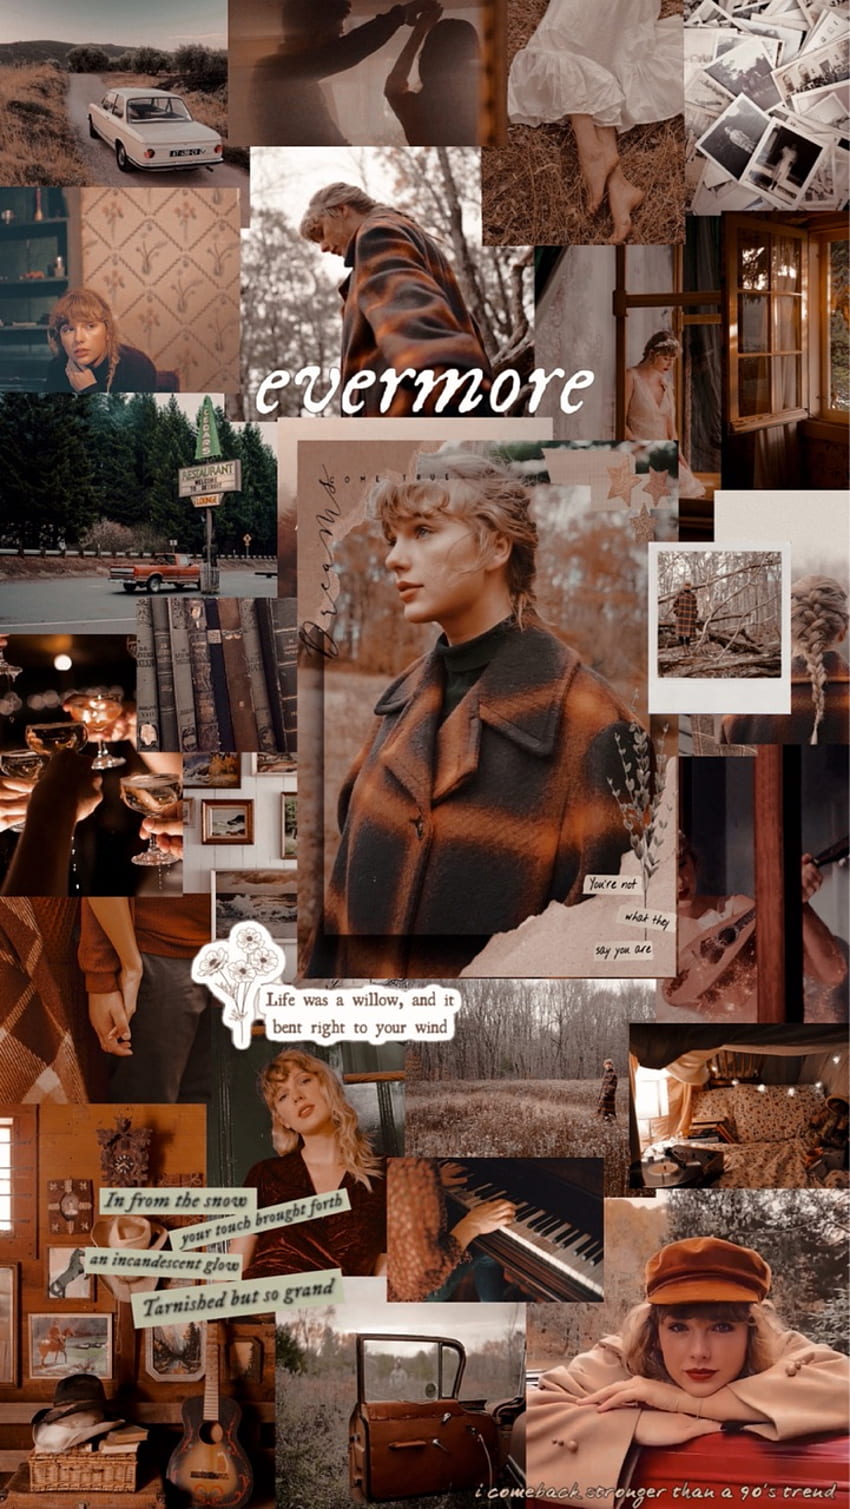 Taylor Swift Evermore Aesthetic diunggah oleh â® b e c a, Taylor Swift Collage wallpaper ponsel HD